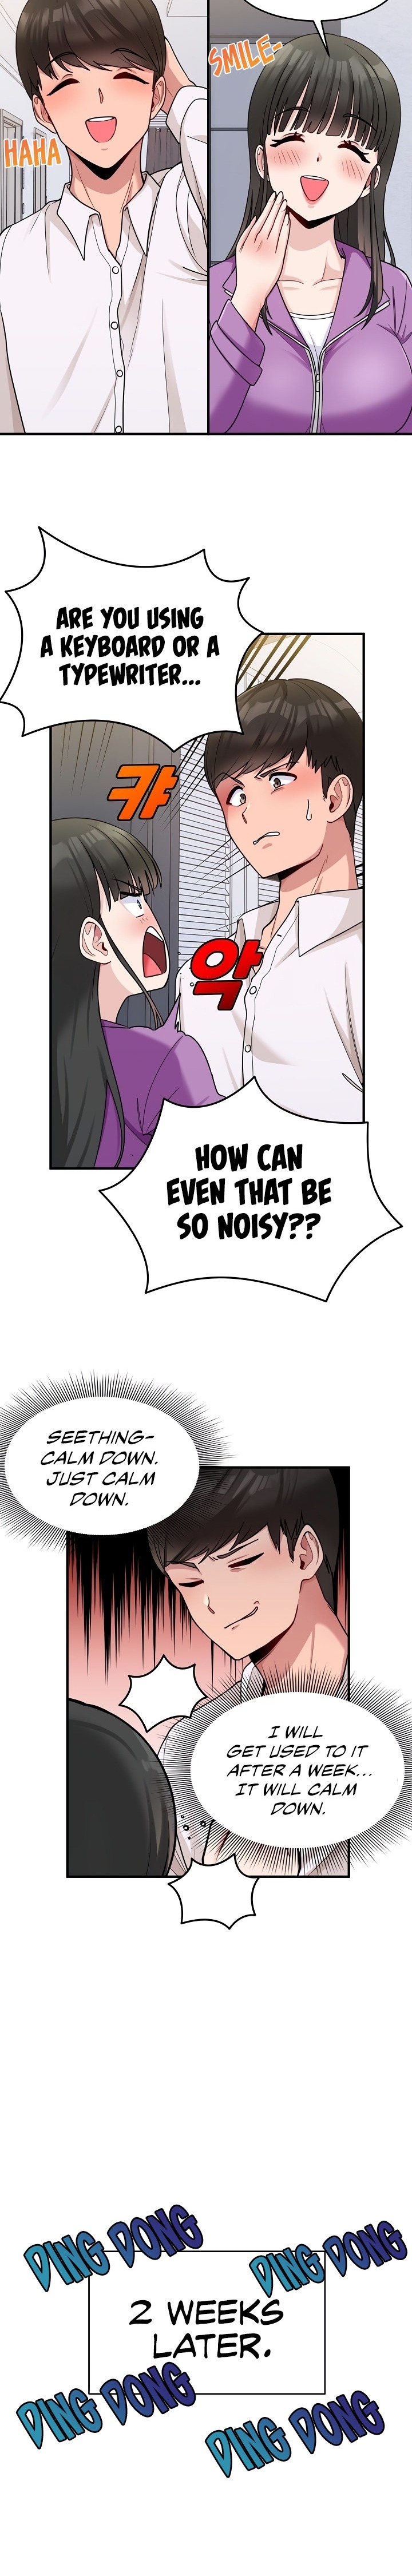 A Crushing Confession - Chapter 1 Page 12